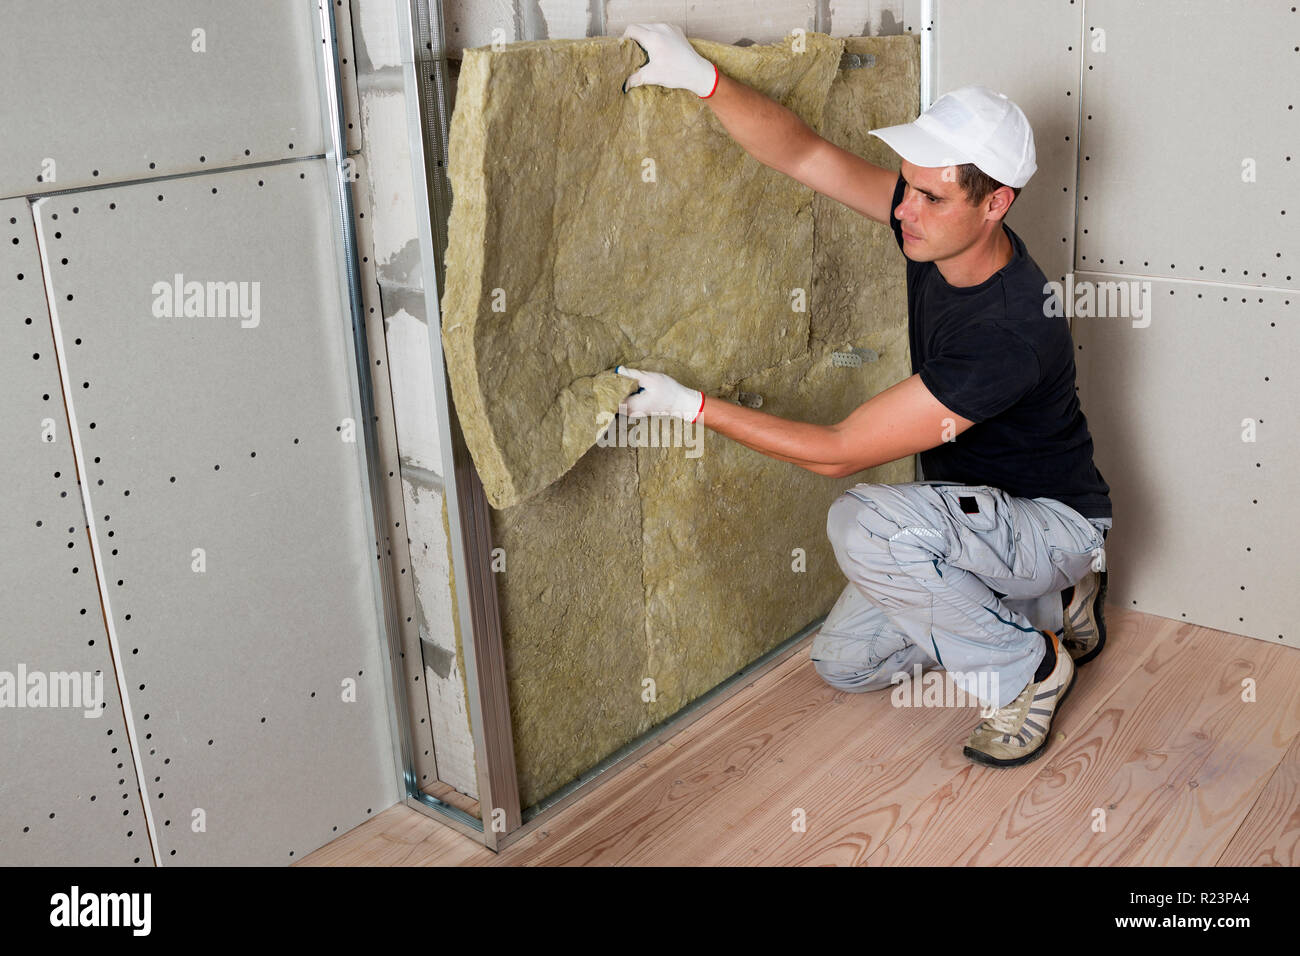 Worker insulating a room wall with mineral rock wool thermal insulation., Stock image